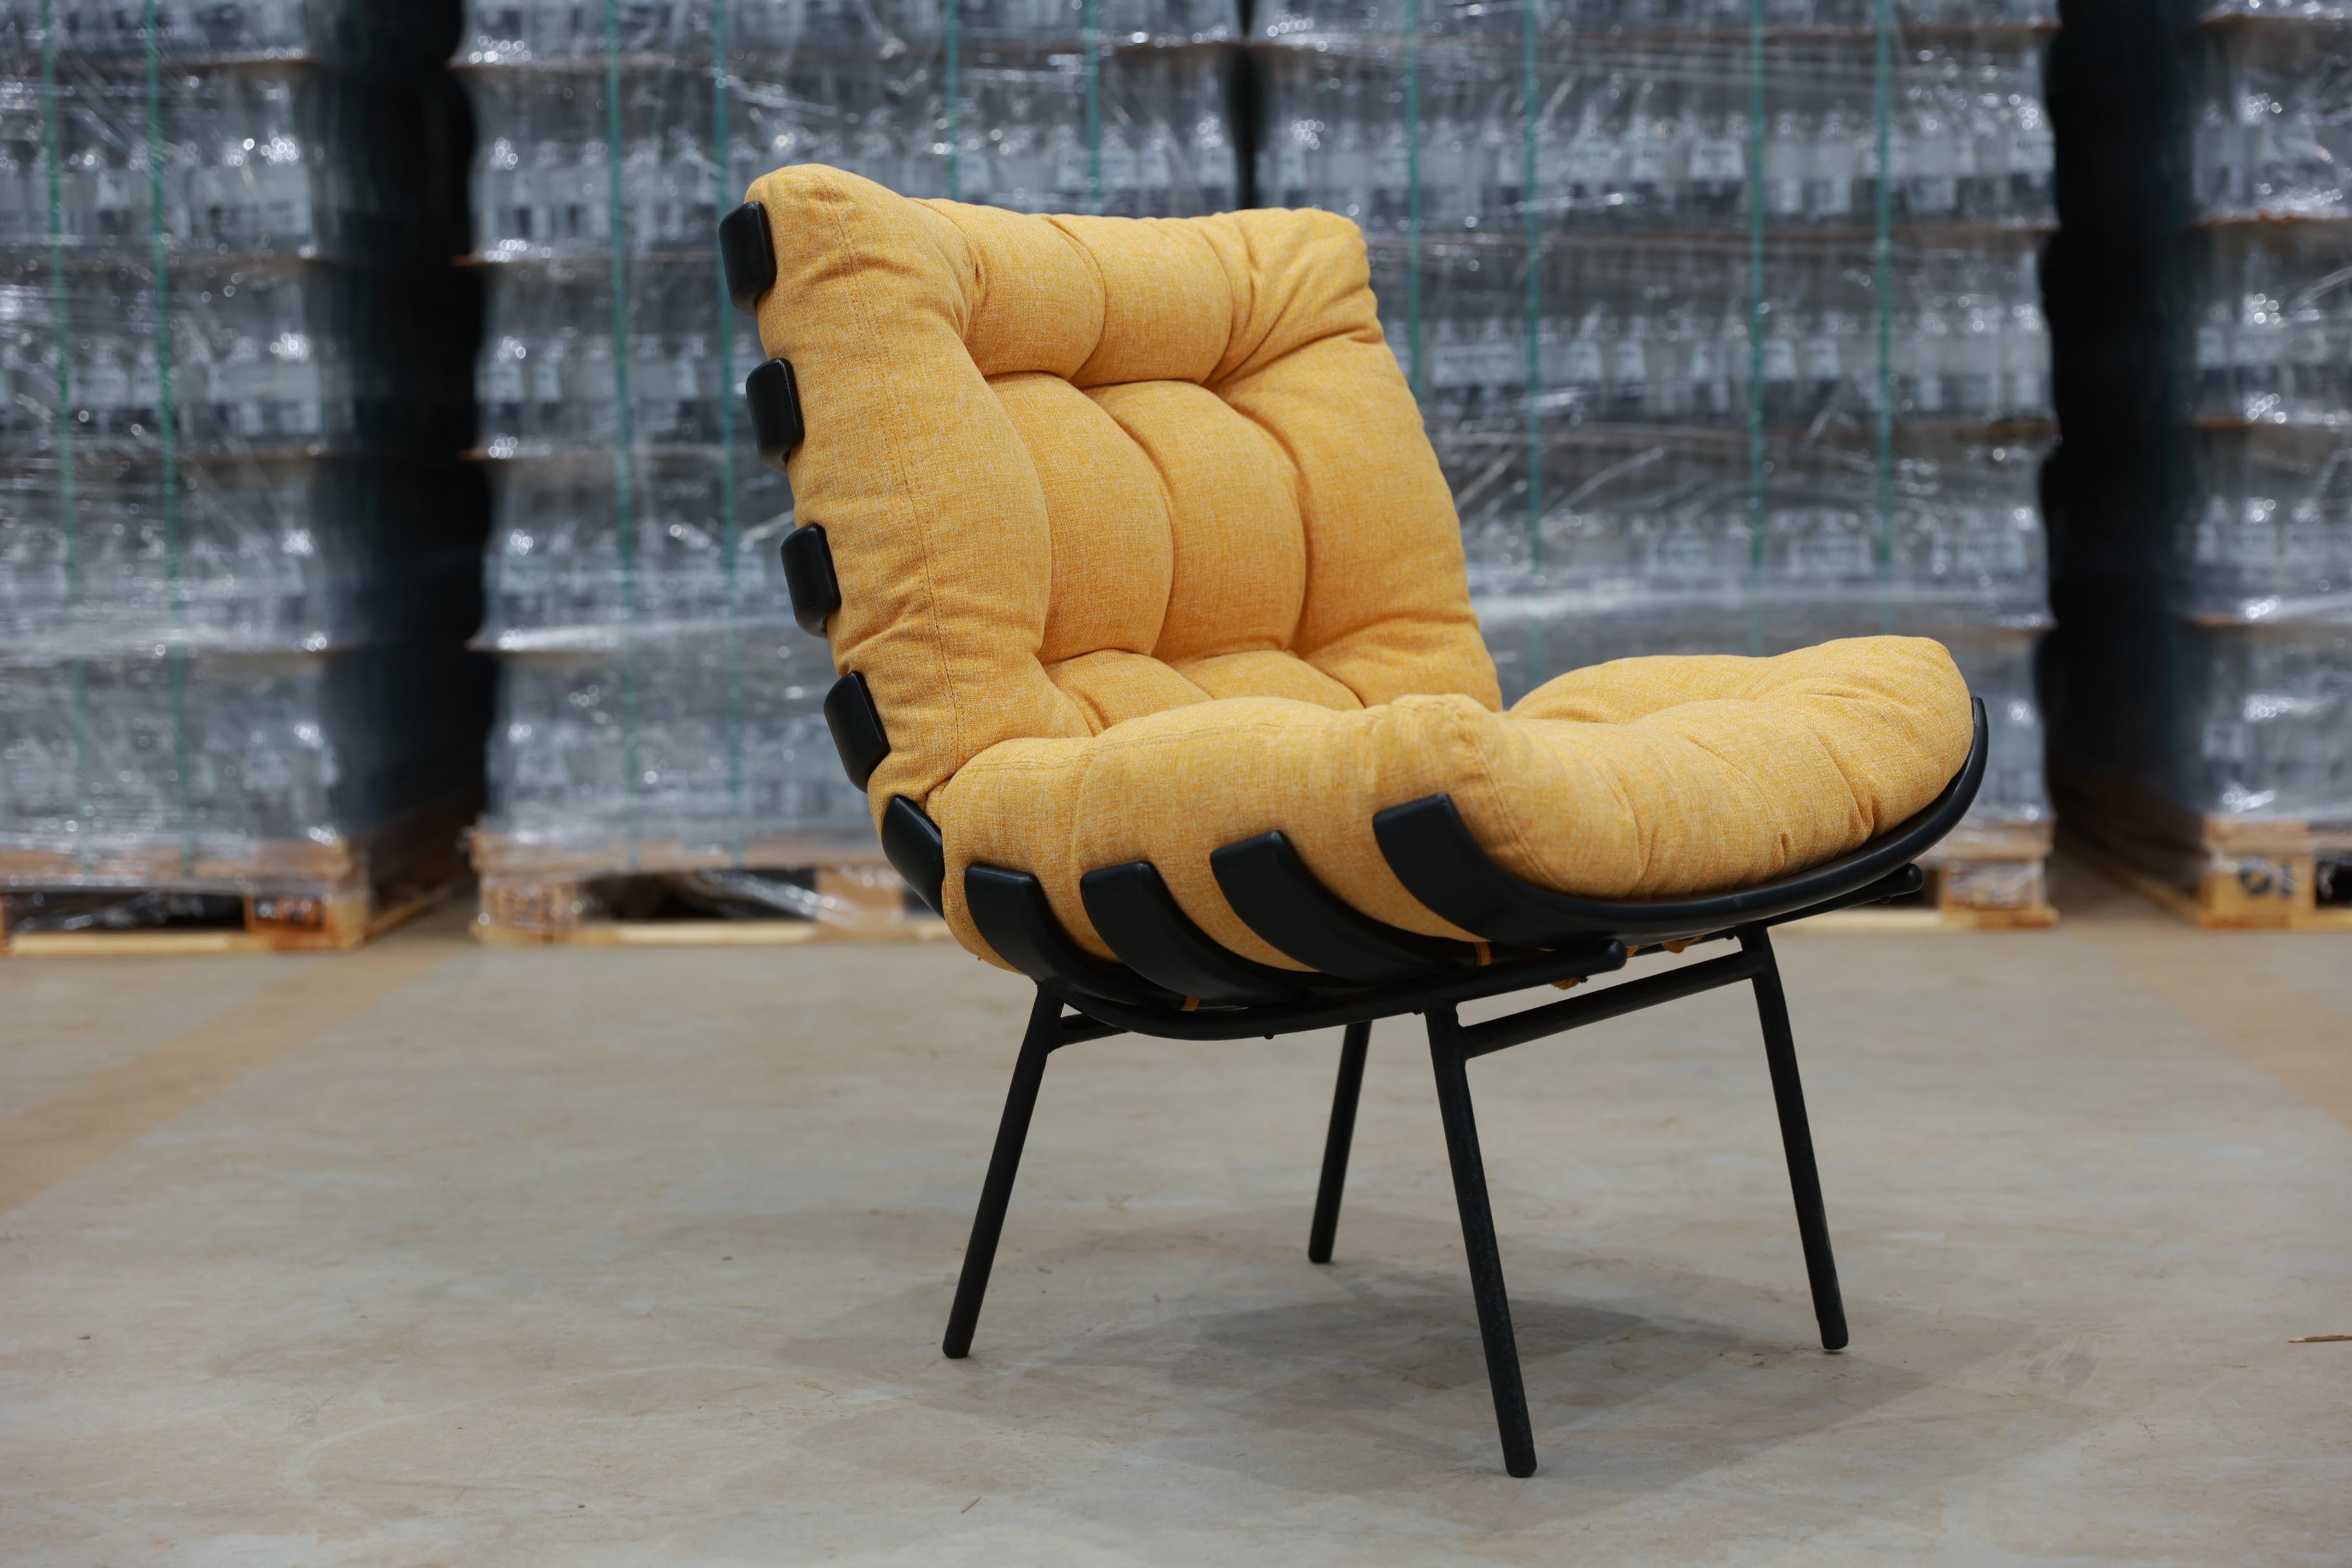 Available today, this “Costella” Armchair in Hardwood & Fabric att. to Martin Eisler, 1950’s Brazil s nothing less than awesome!

The model of this chair is called “Costella” and has a unique, sophisticated, and comfortable style to it. The chair is